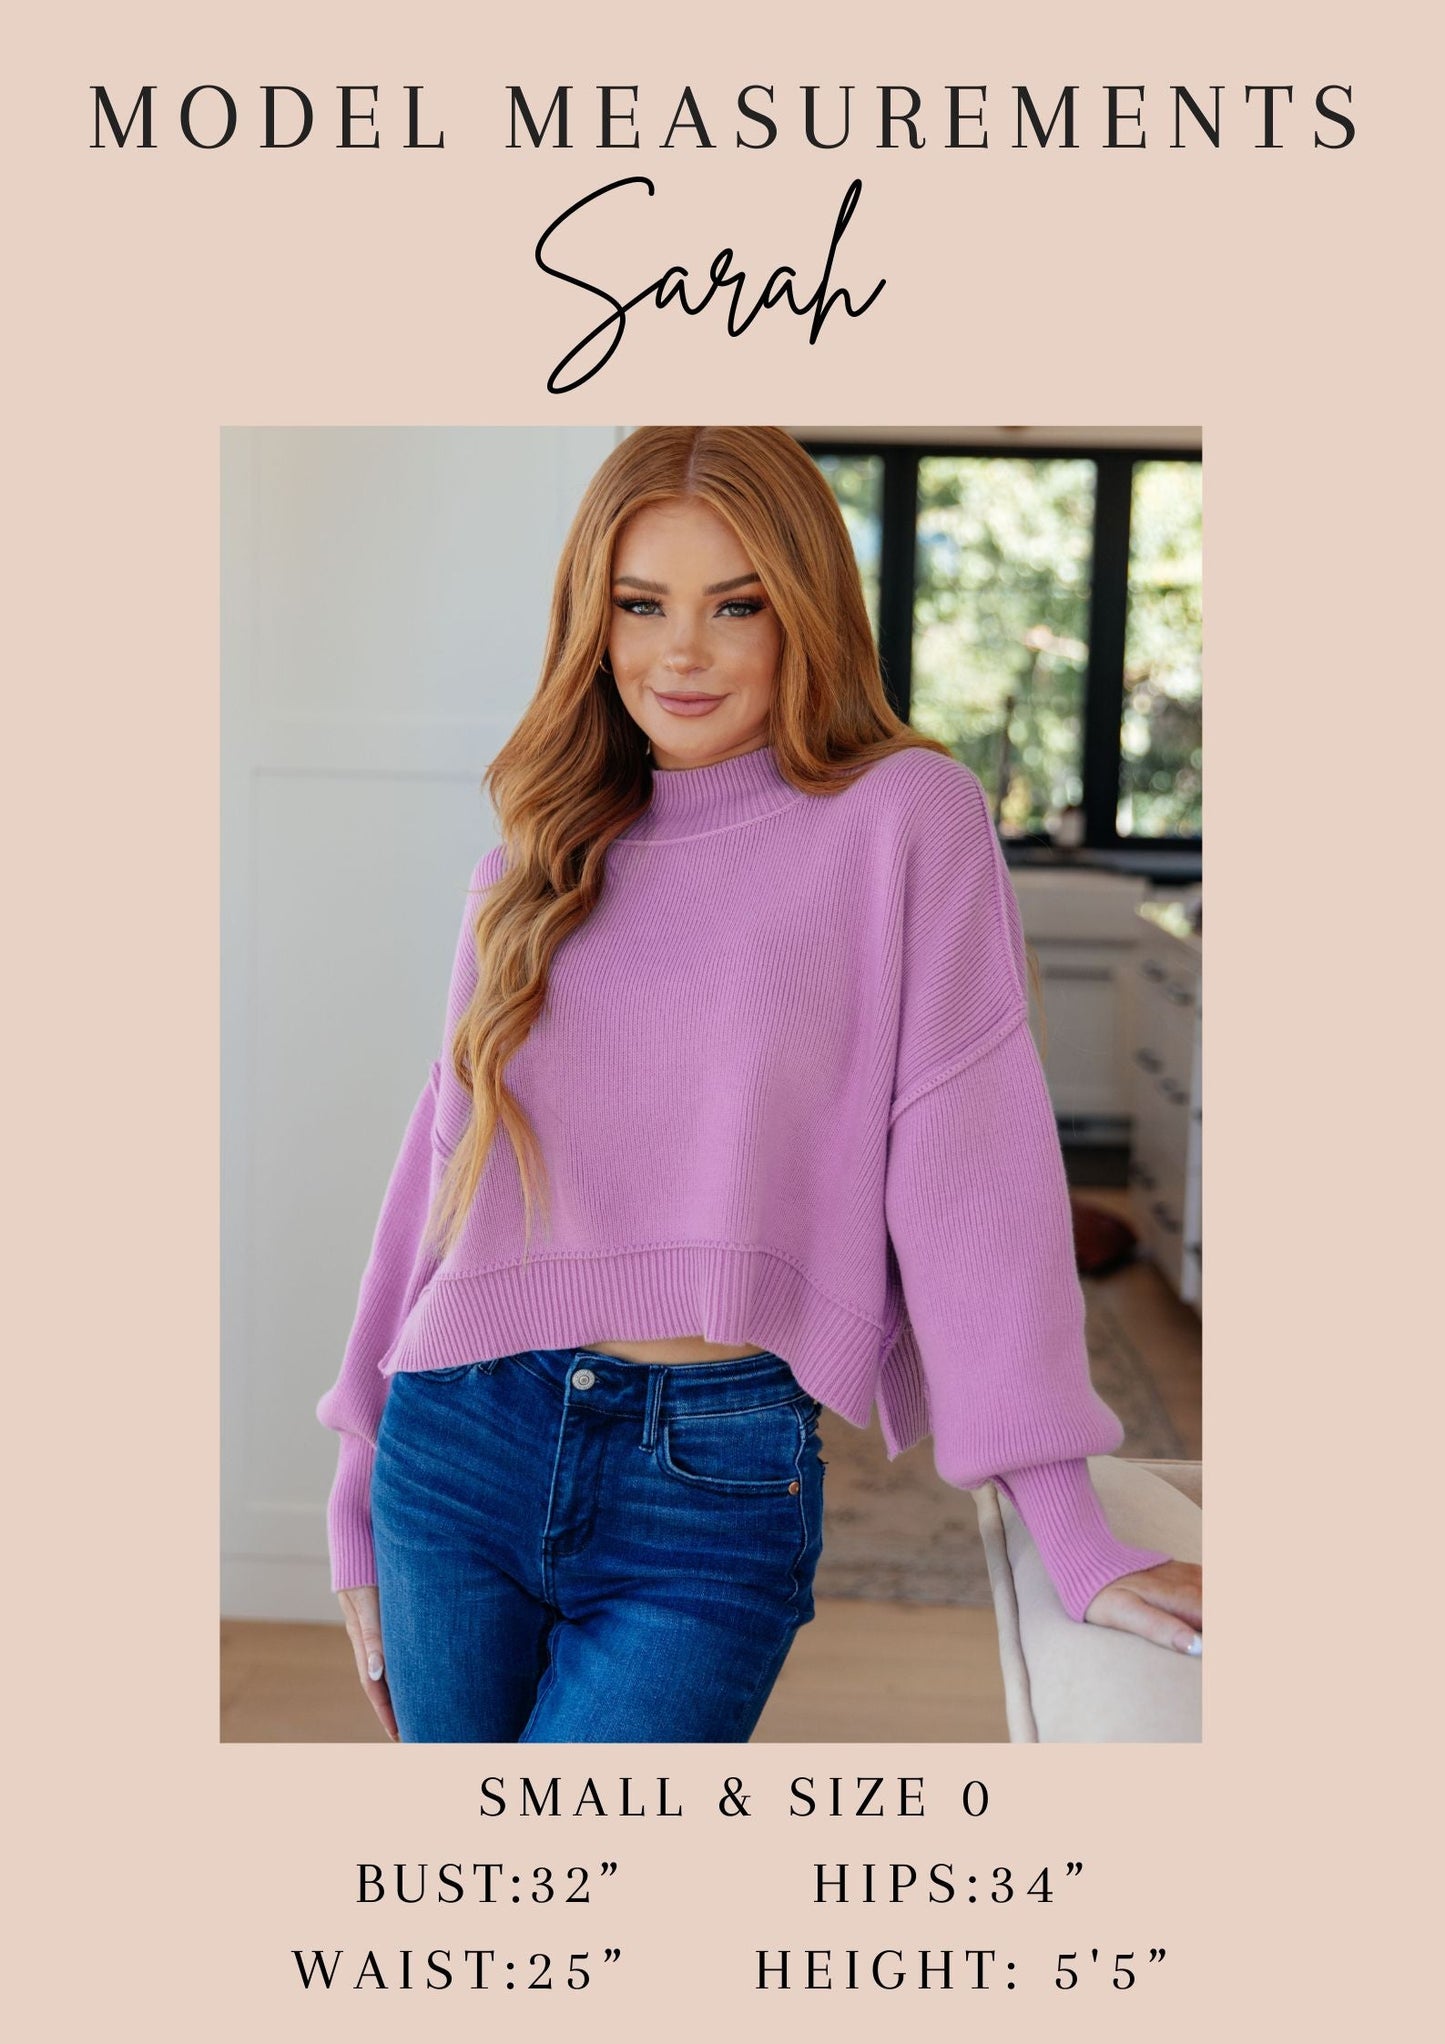 Back to Life V-Neck Sweater in Pink